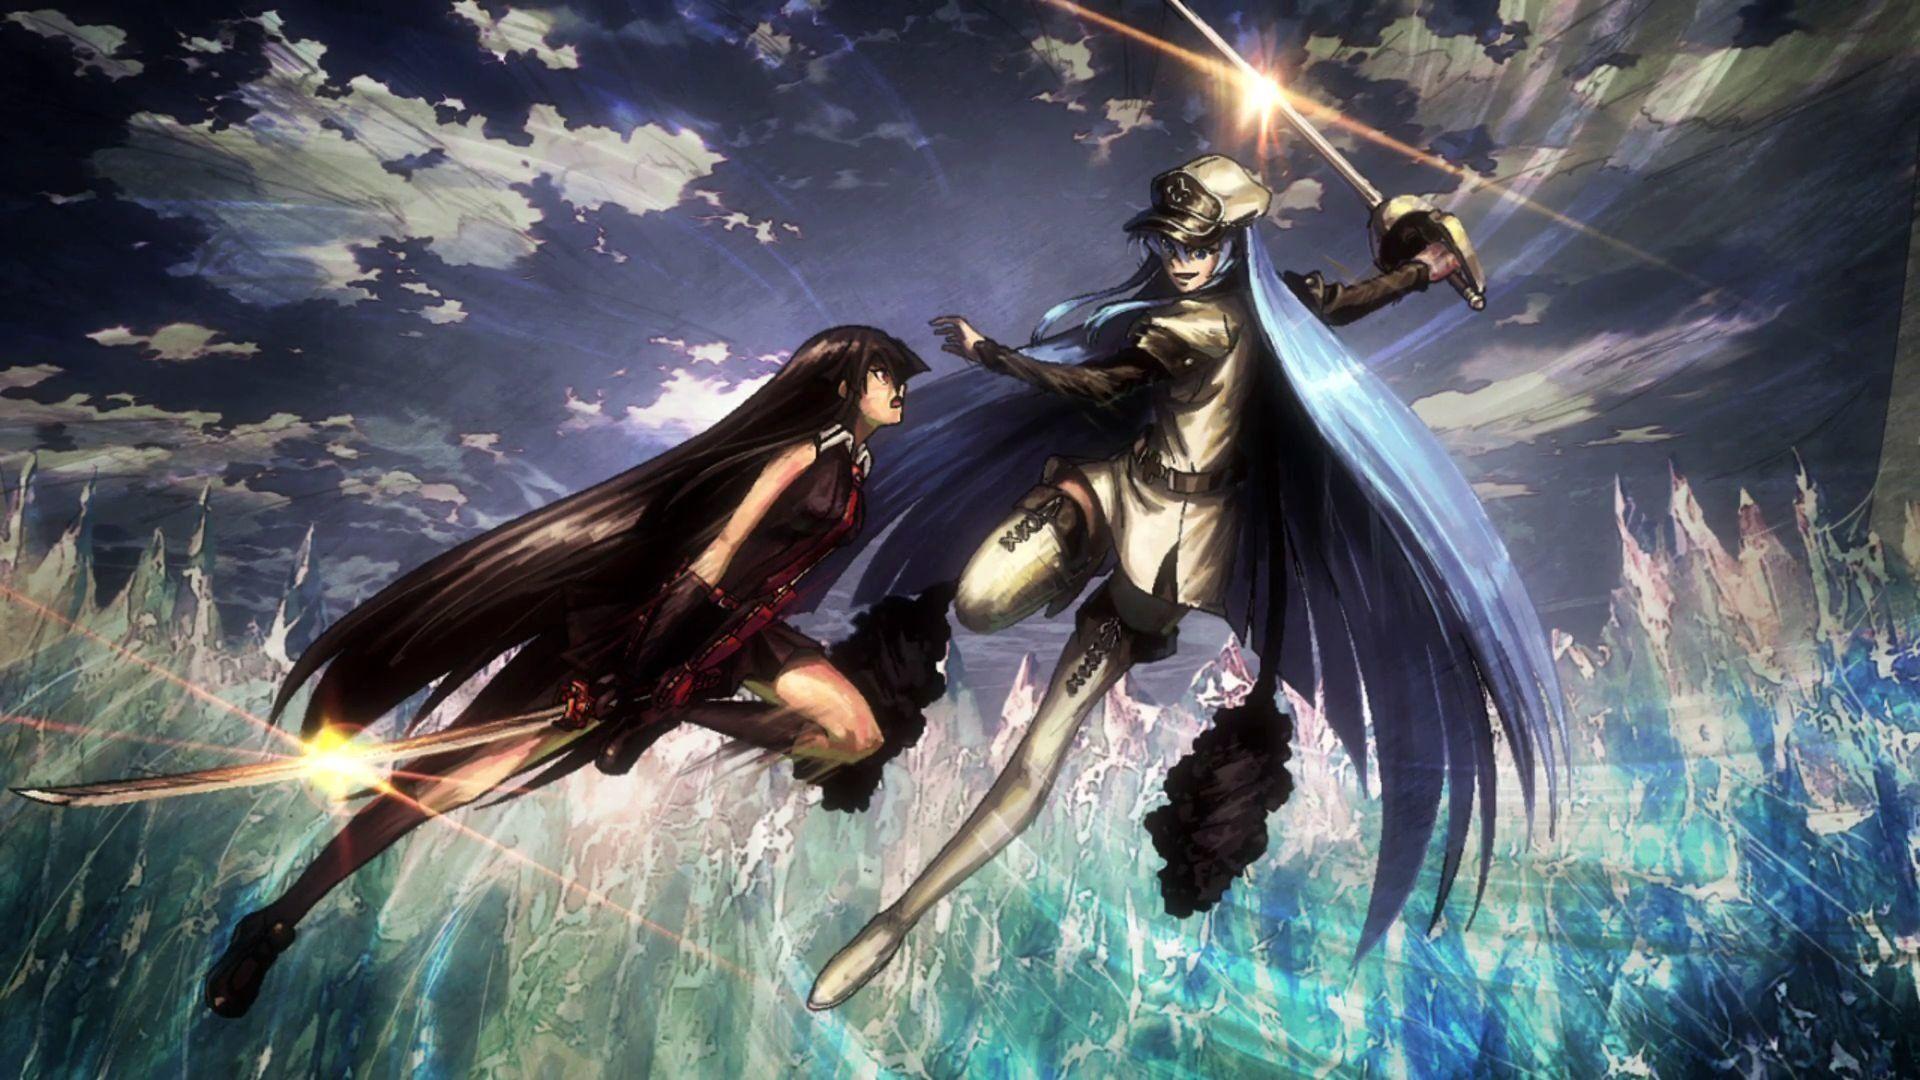 Akame Vs Esdeath HD Wallpaper. Background Imagex1080